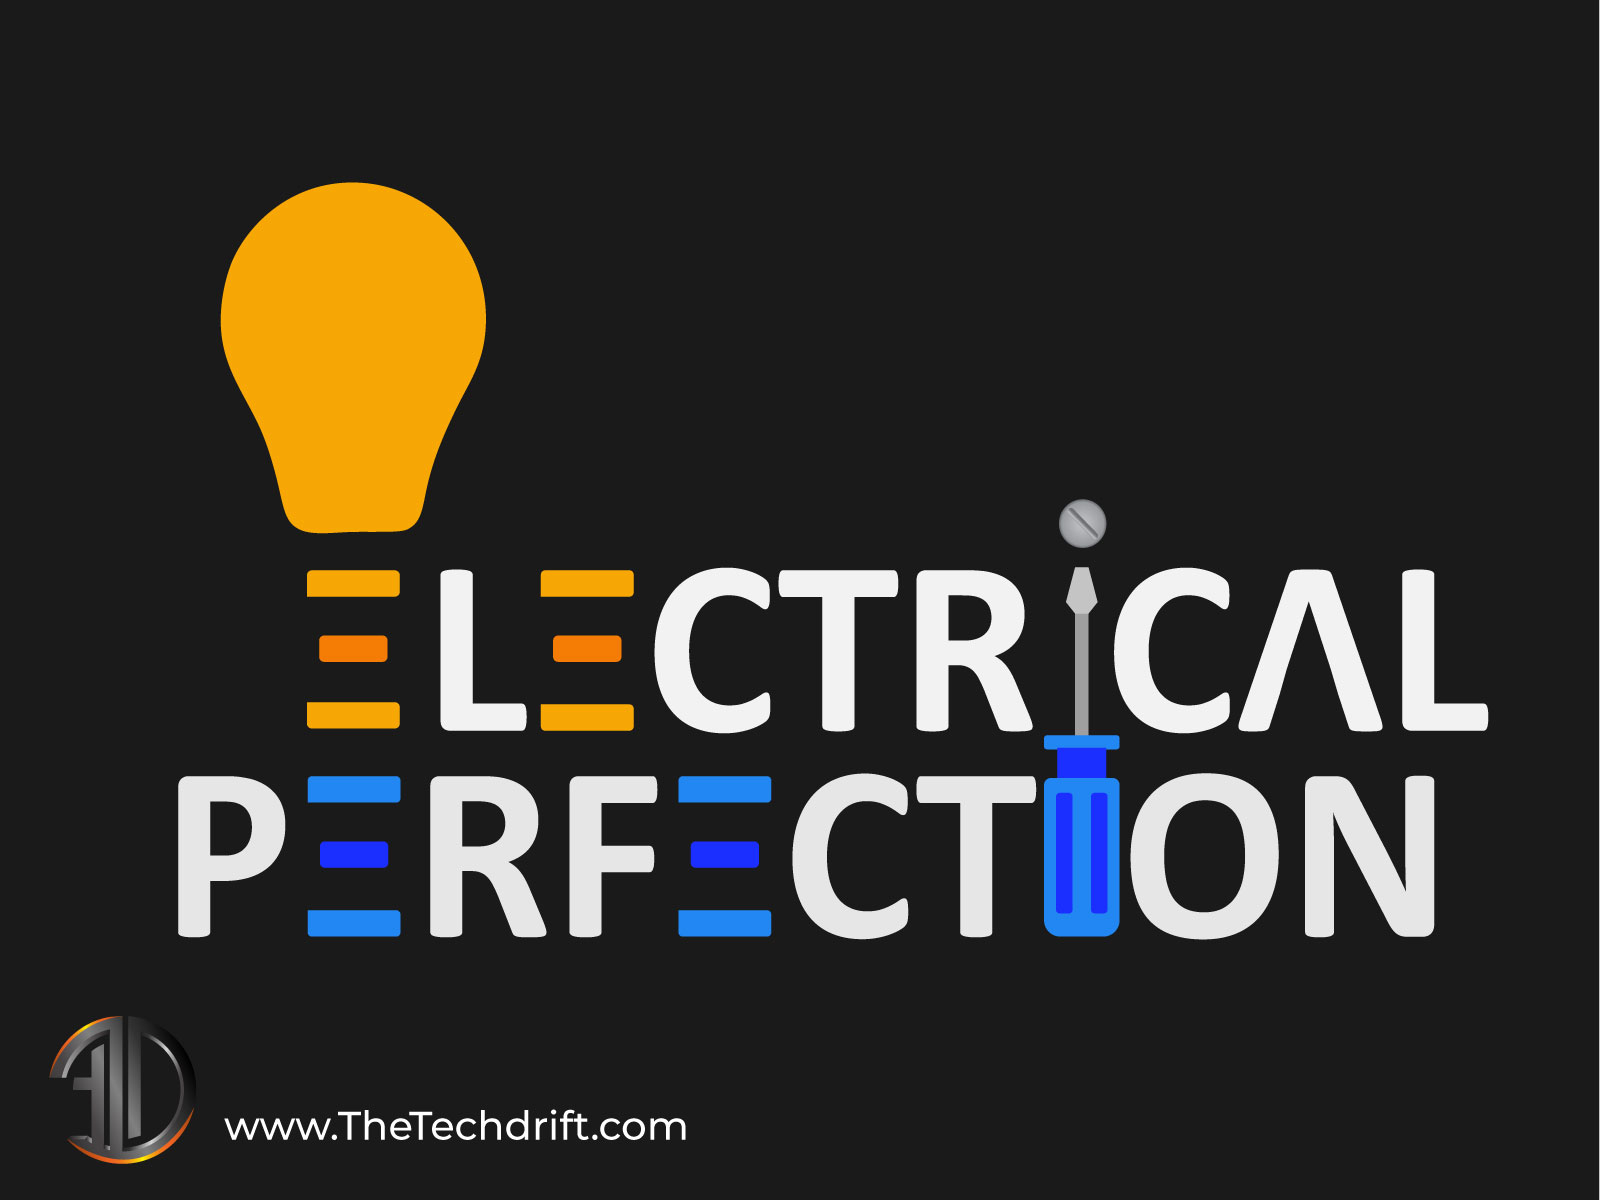 Electrical Perfection Llc Electrician Logo By The Techdrift On